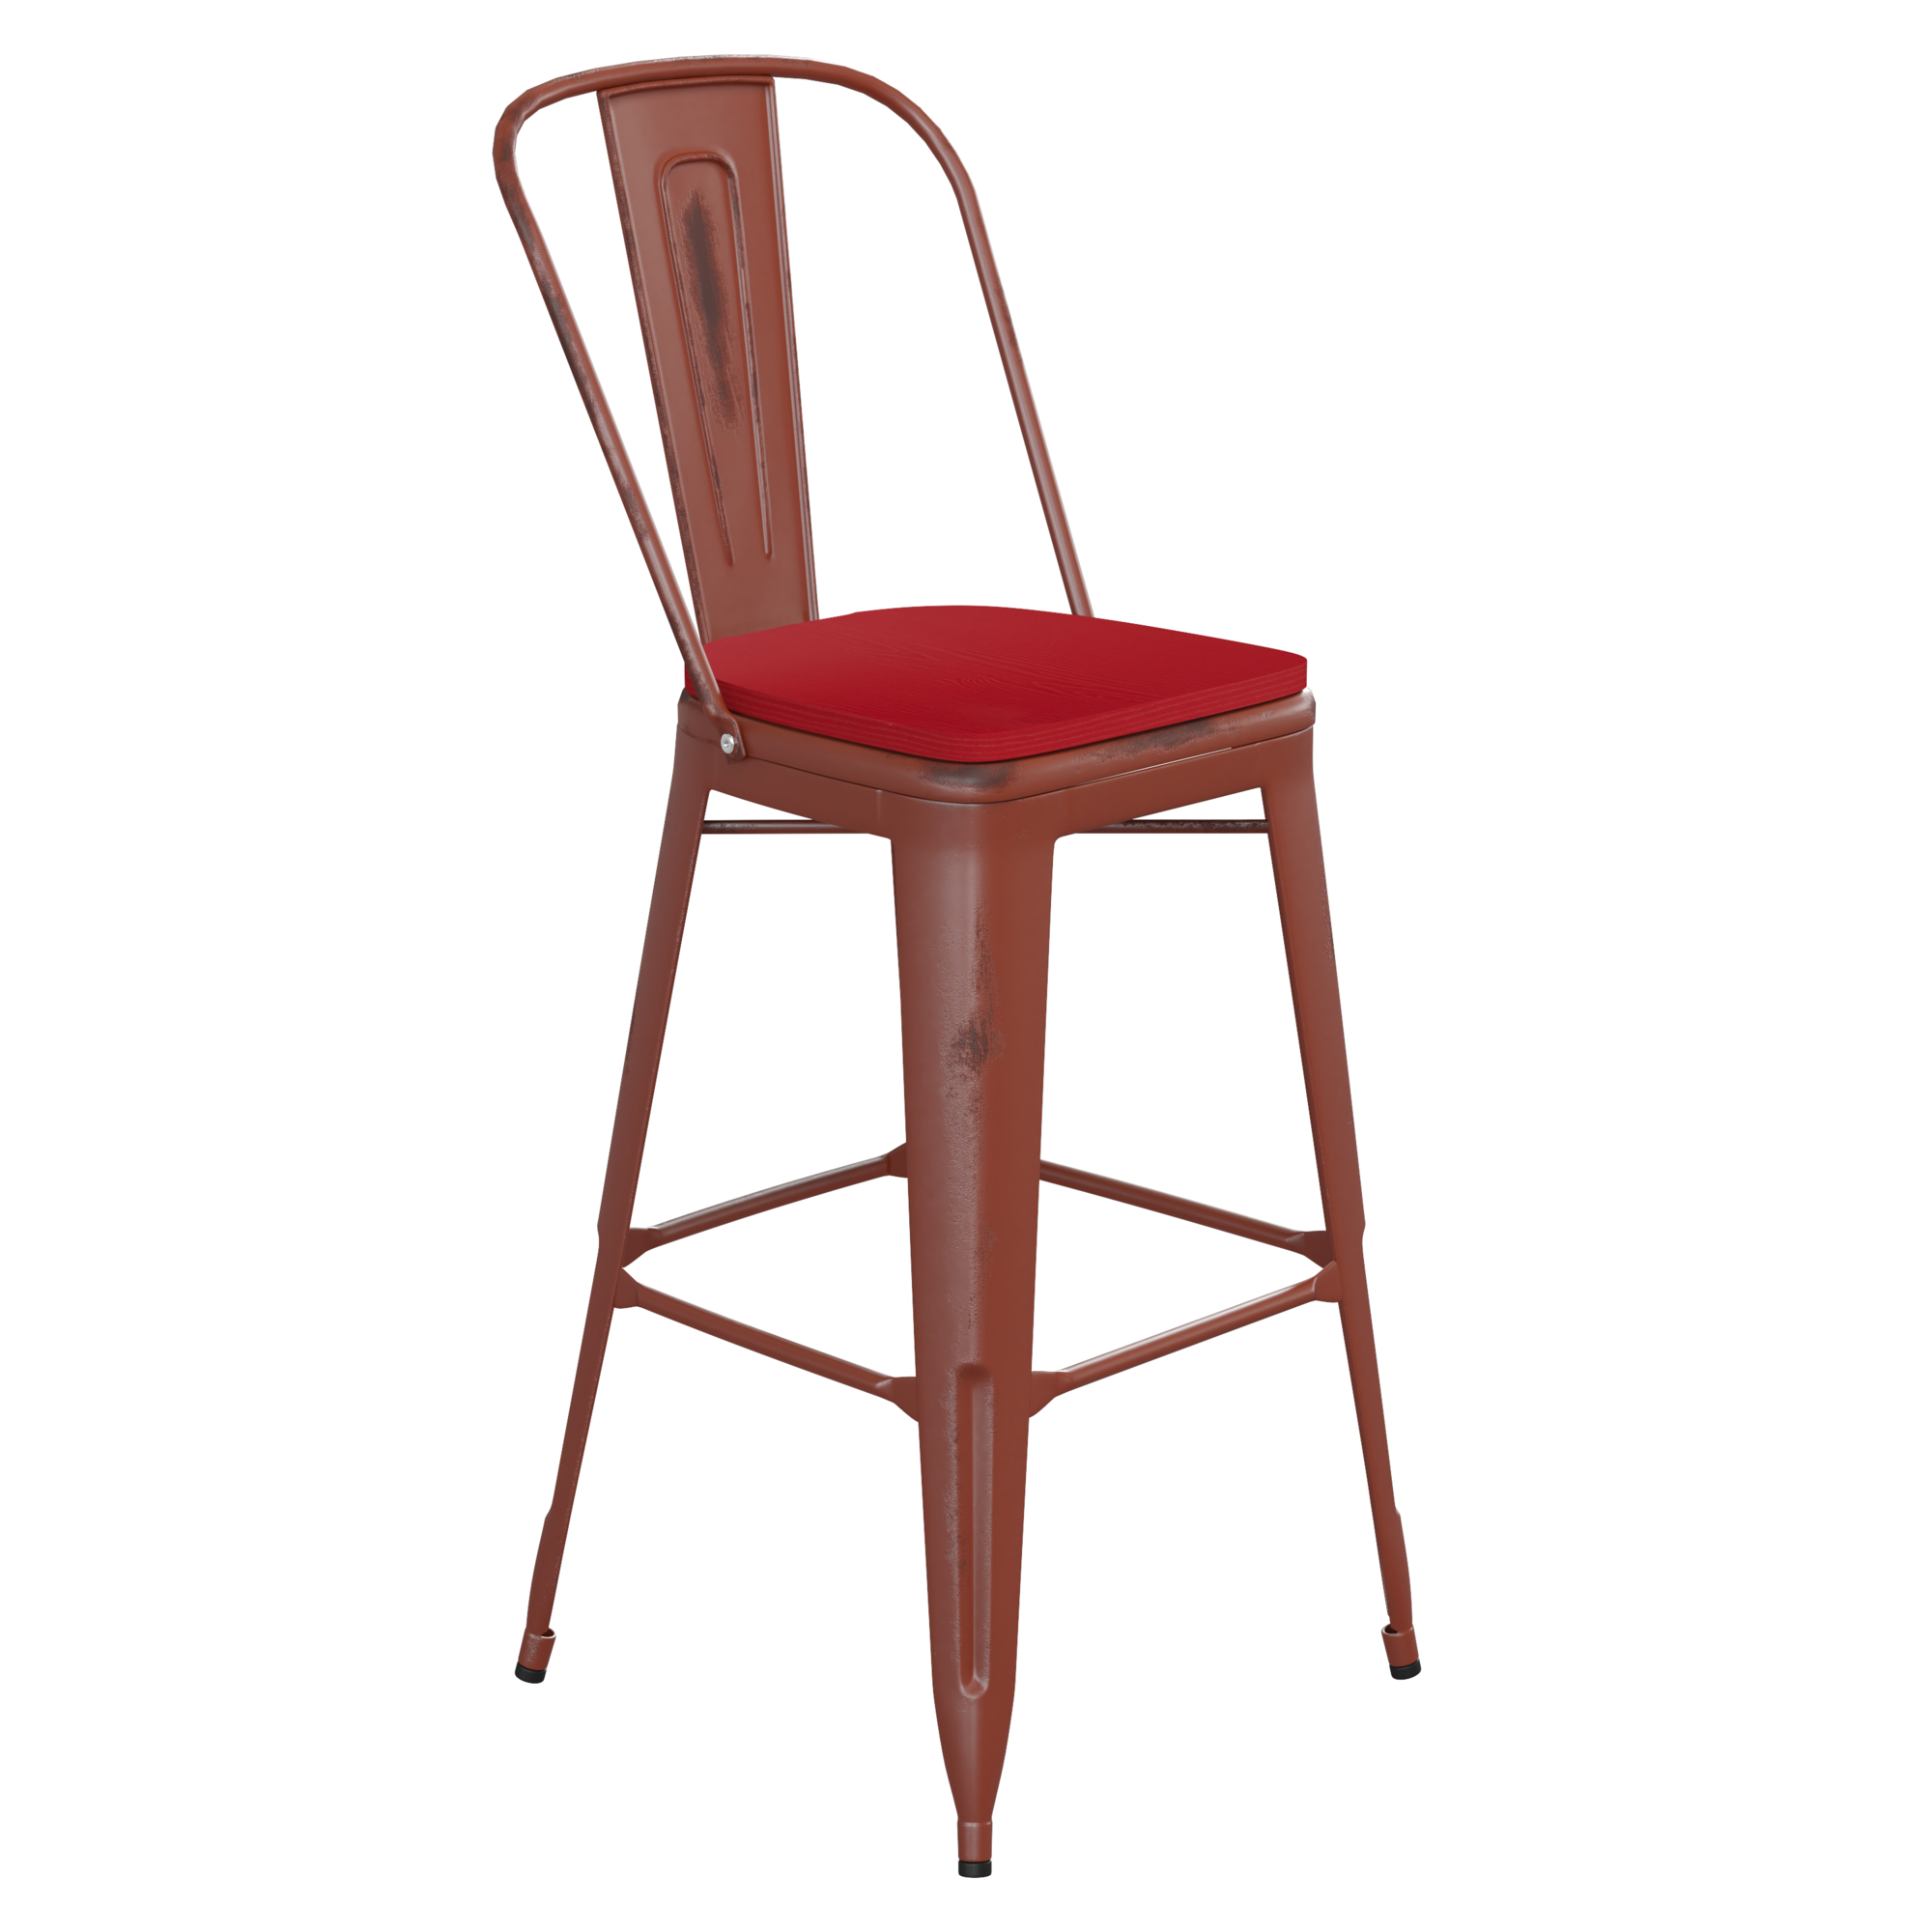 Flash Furniture, Red Metal Stool with Gray Poly Seat, Primary Color Red, Included (qty.) 1, Model ET353430RDPL1R